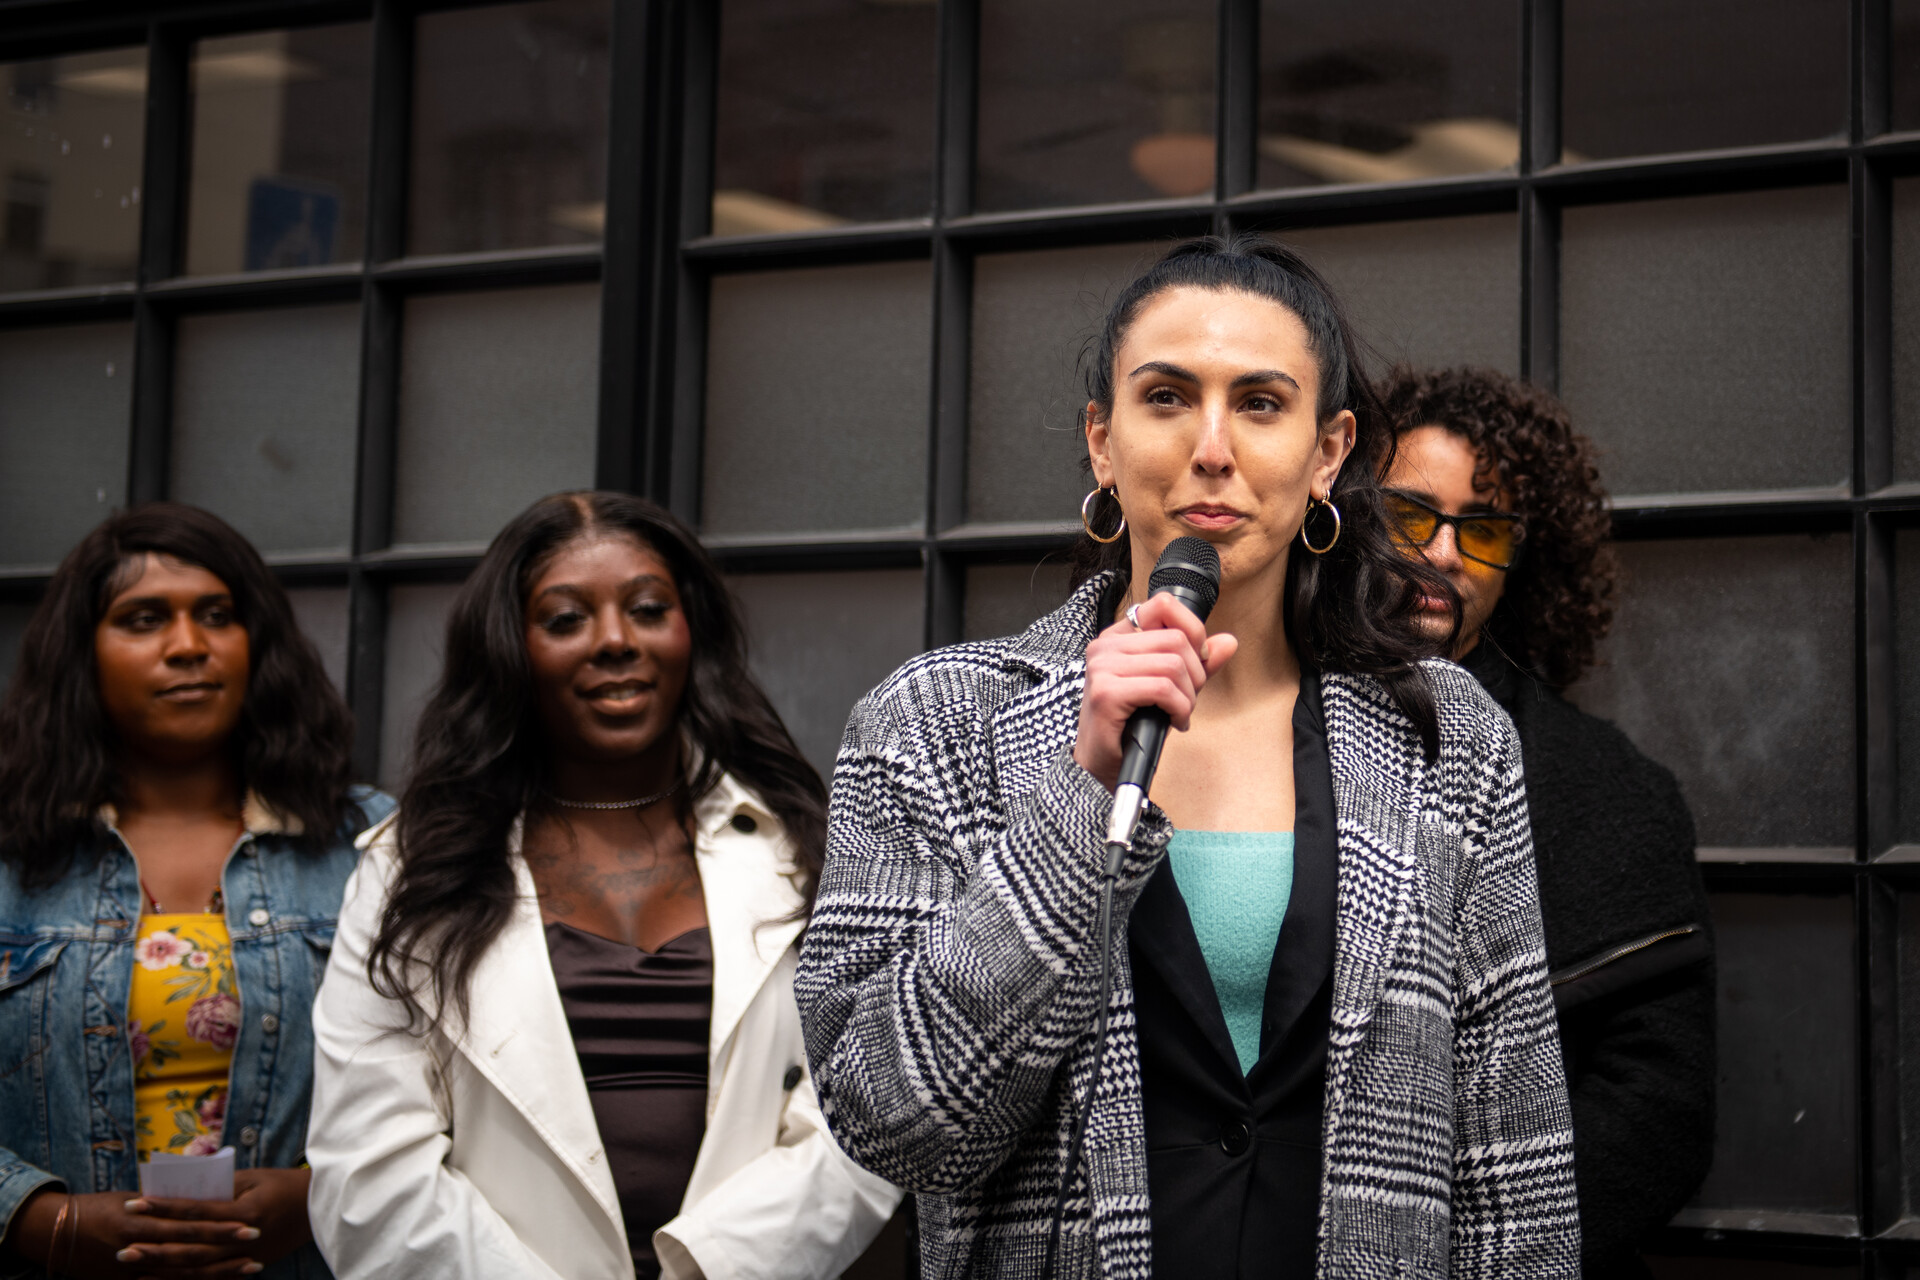 woman speaks into microphone she's holding on sidewalk outside building as three Black and brown people listen in the background